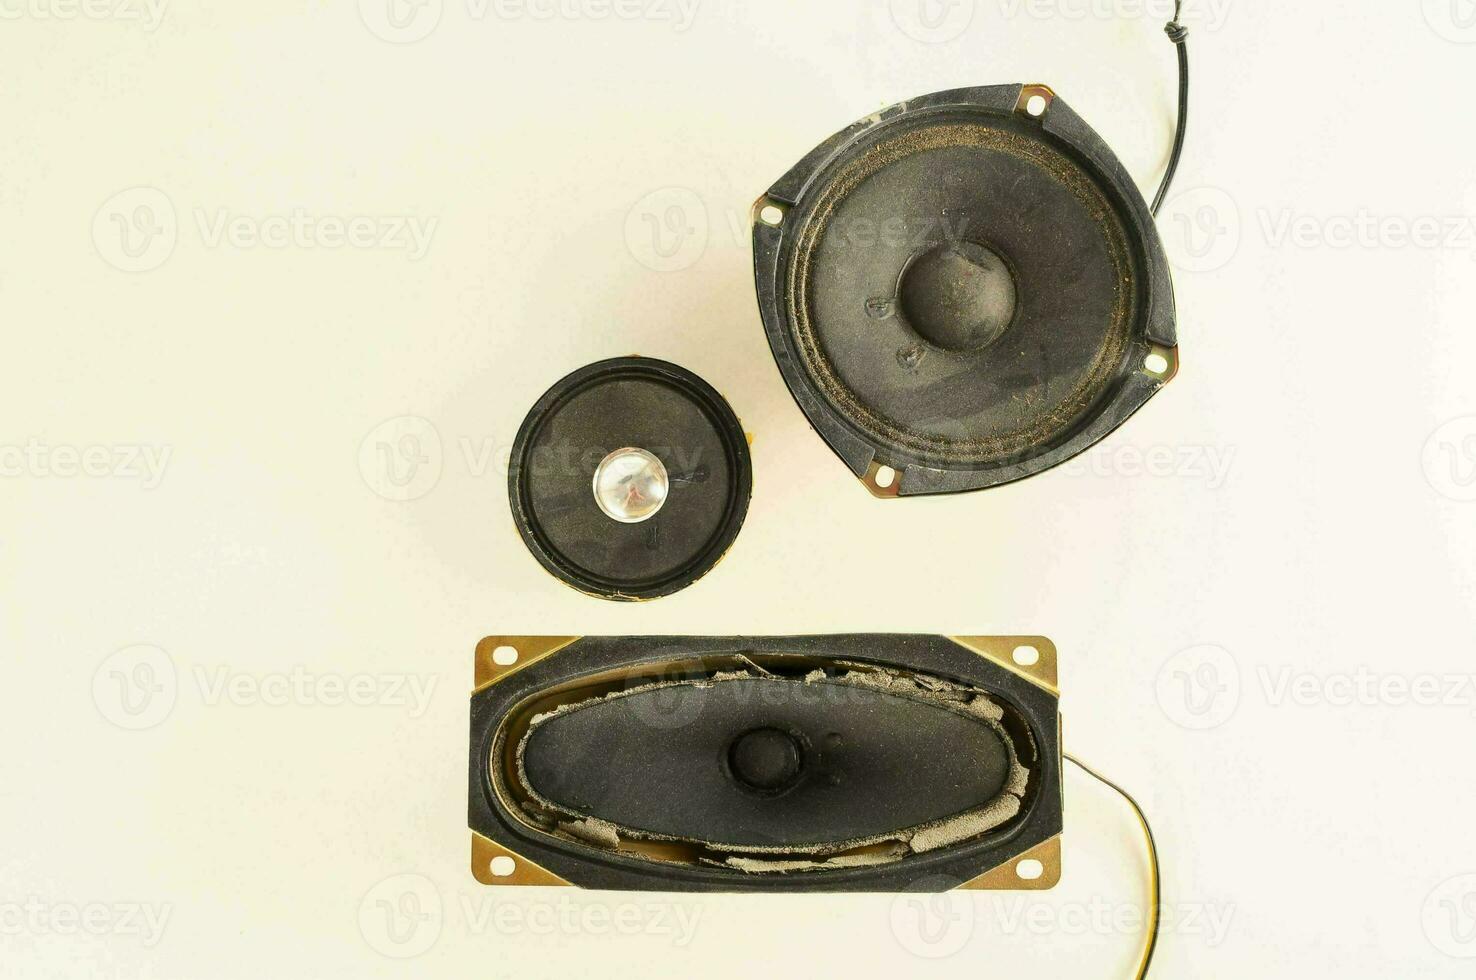 two speakers are shown on a white surface photo